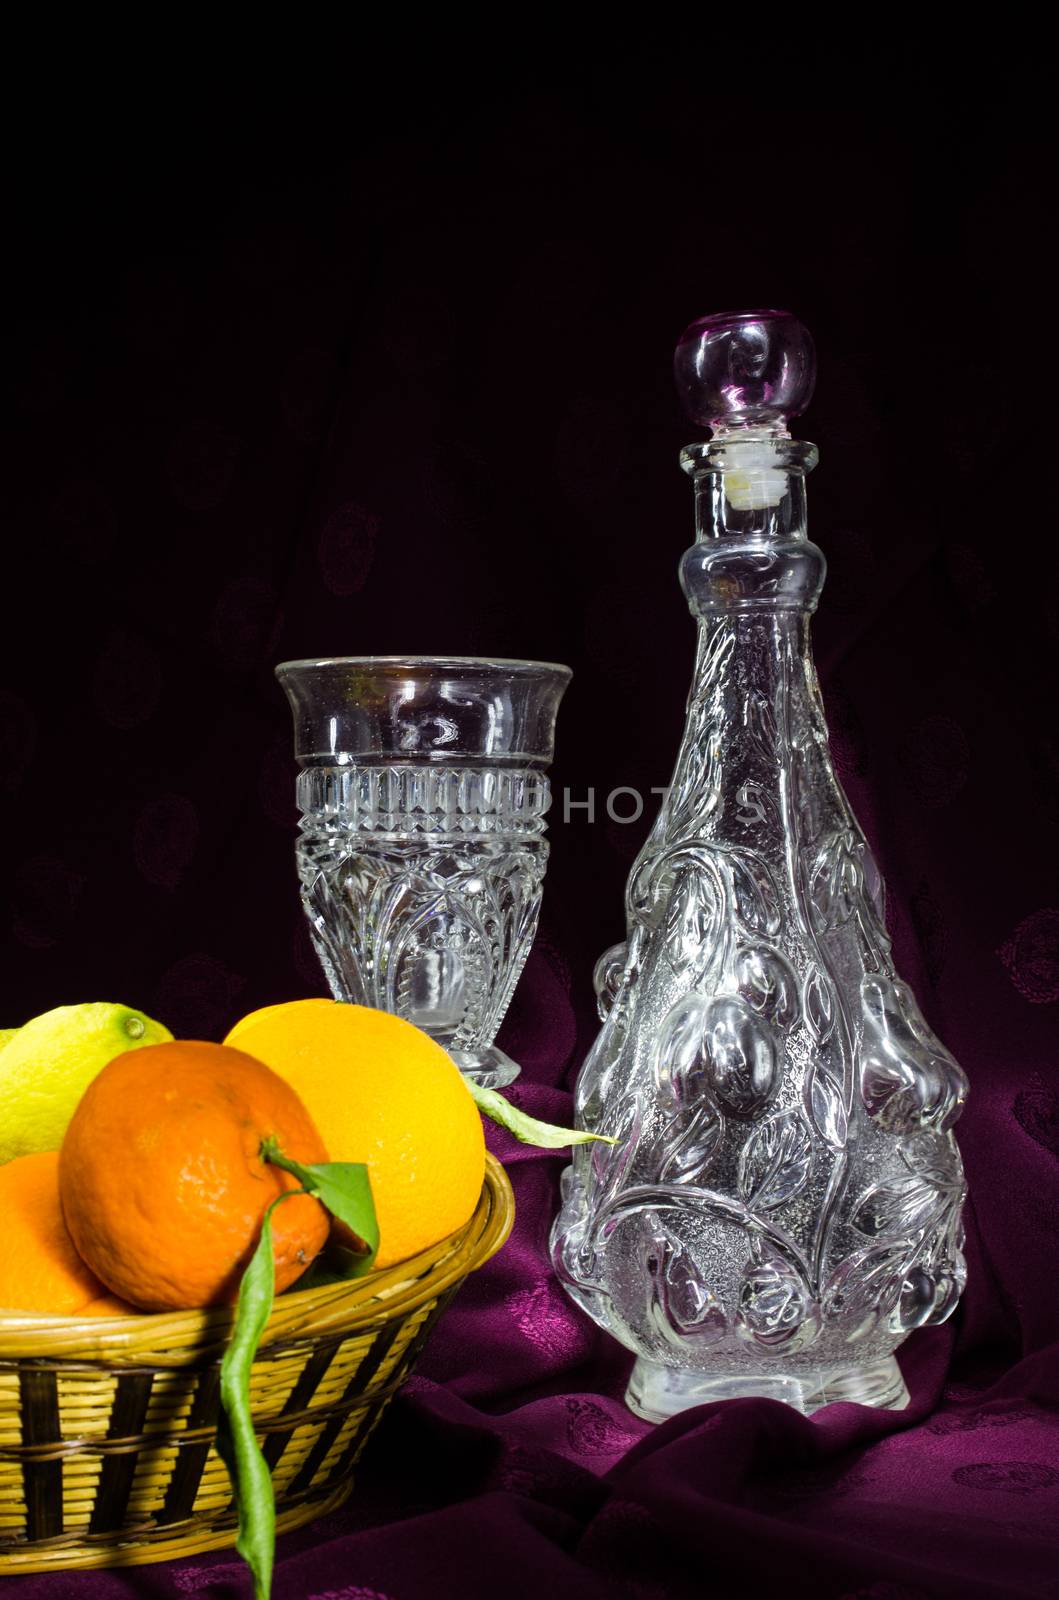 still life composition in light painting